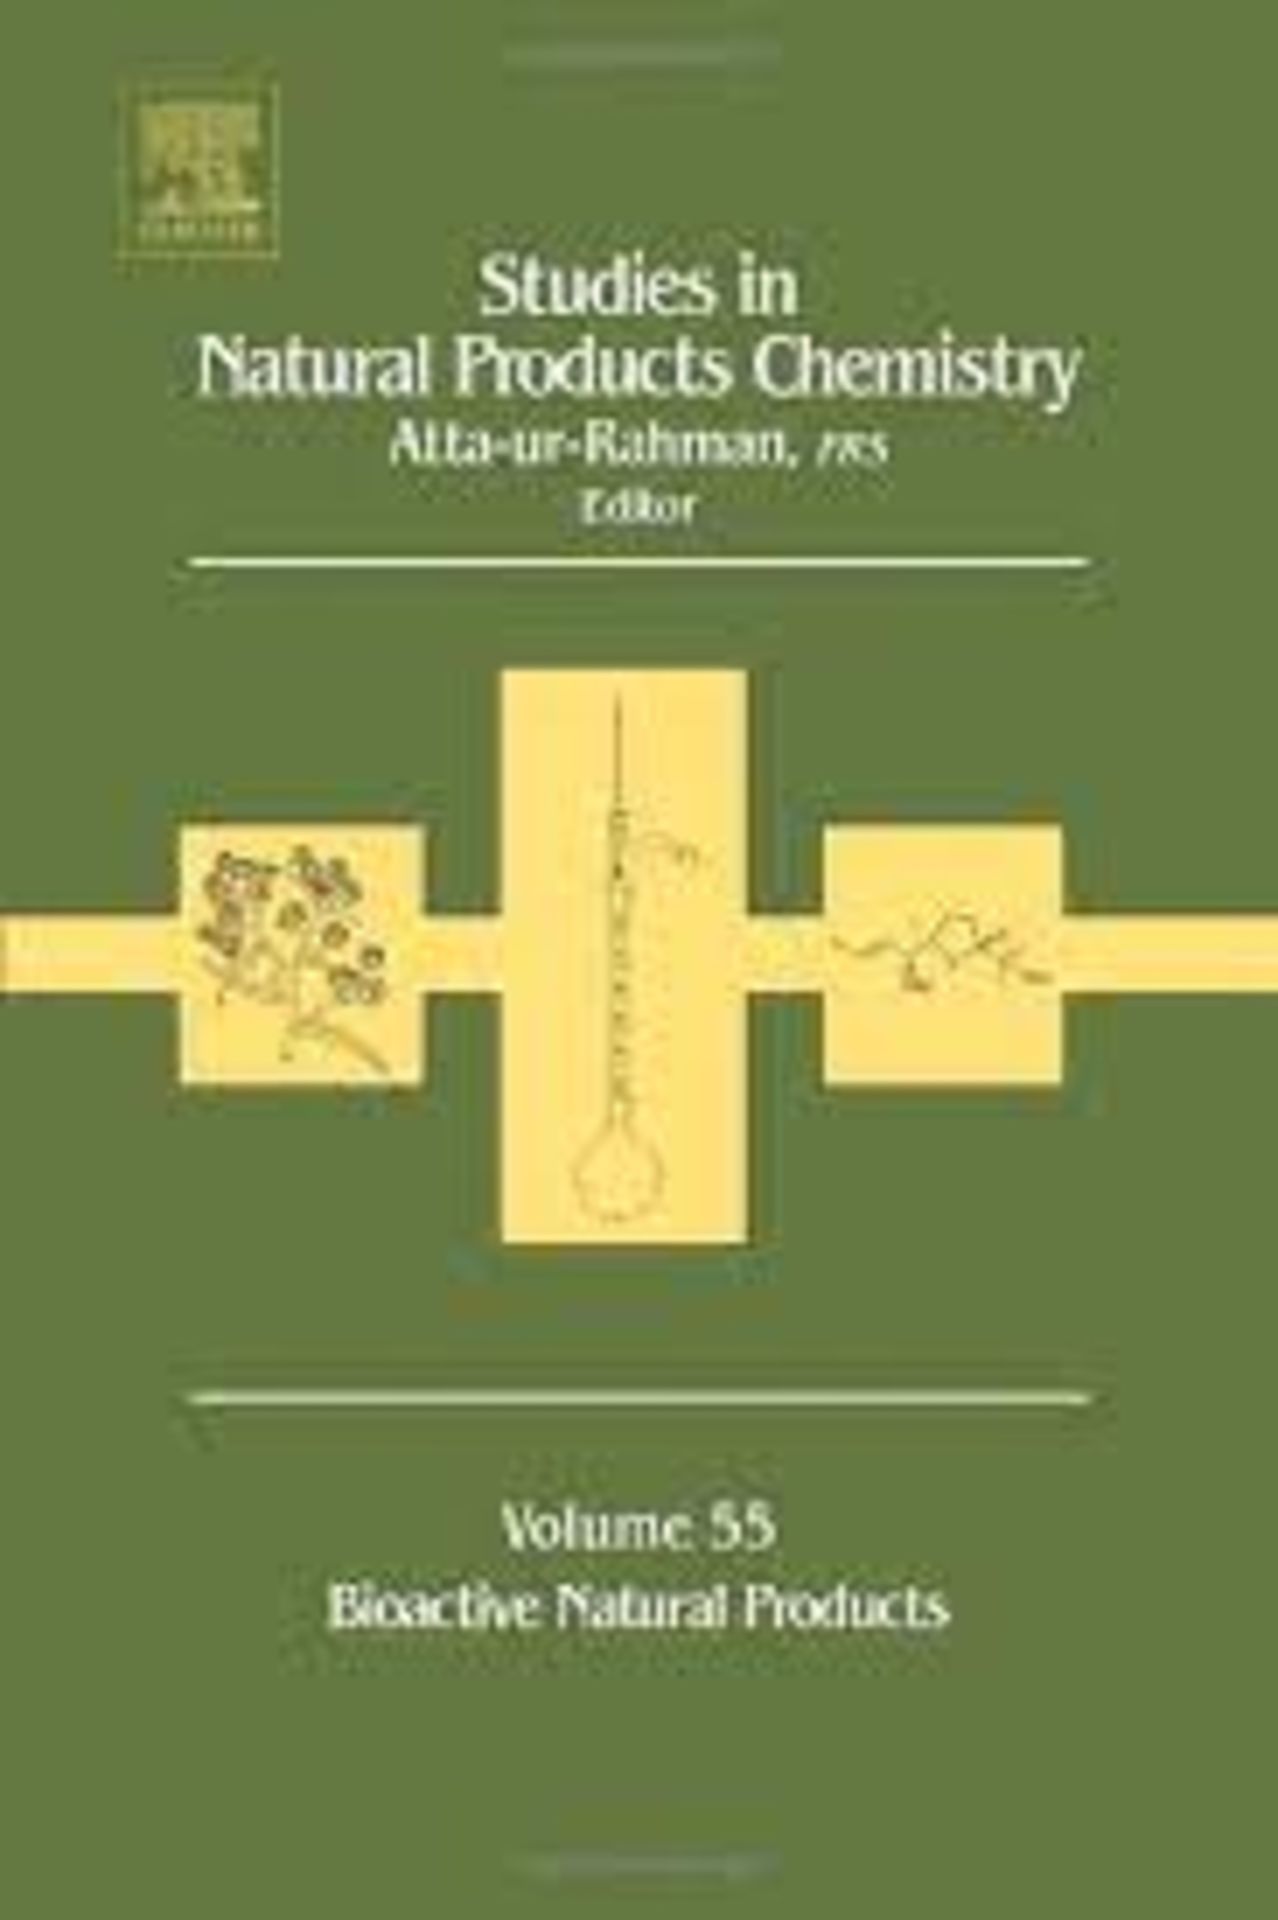 RRP £235 Studies in Natural Products Chemistry: Volume 55 spW50F8963E (LM)